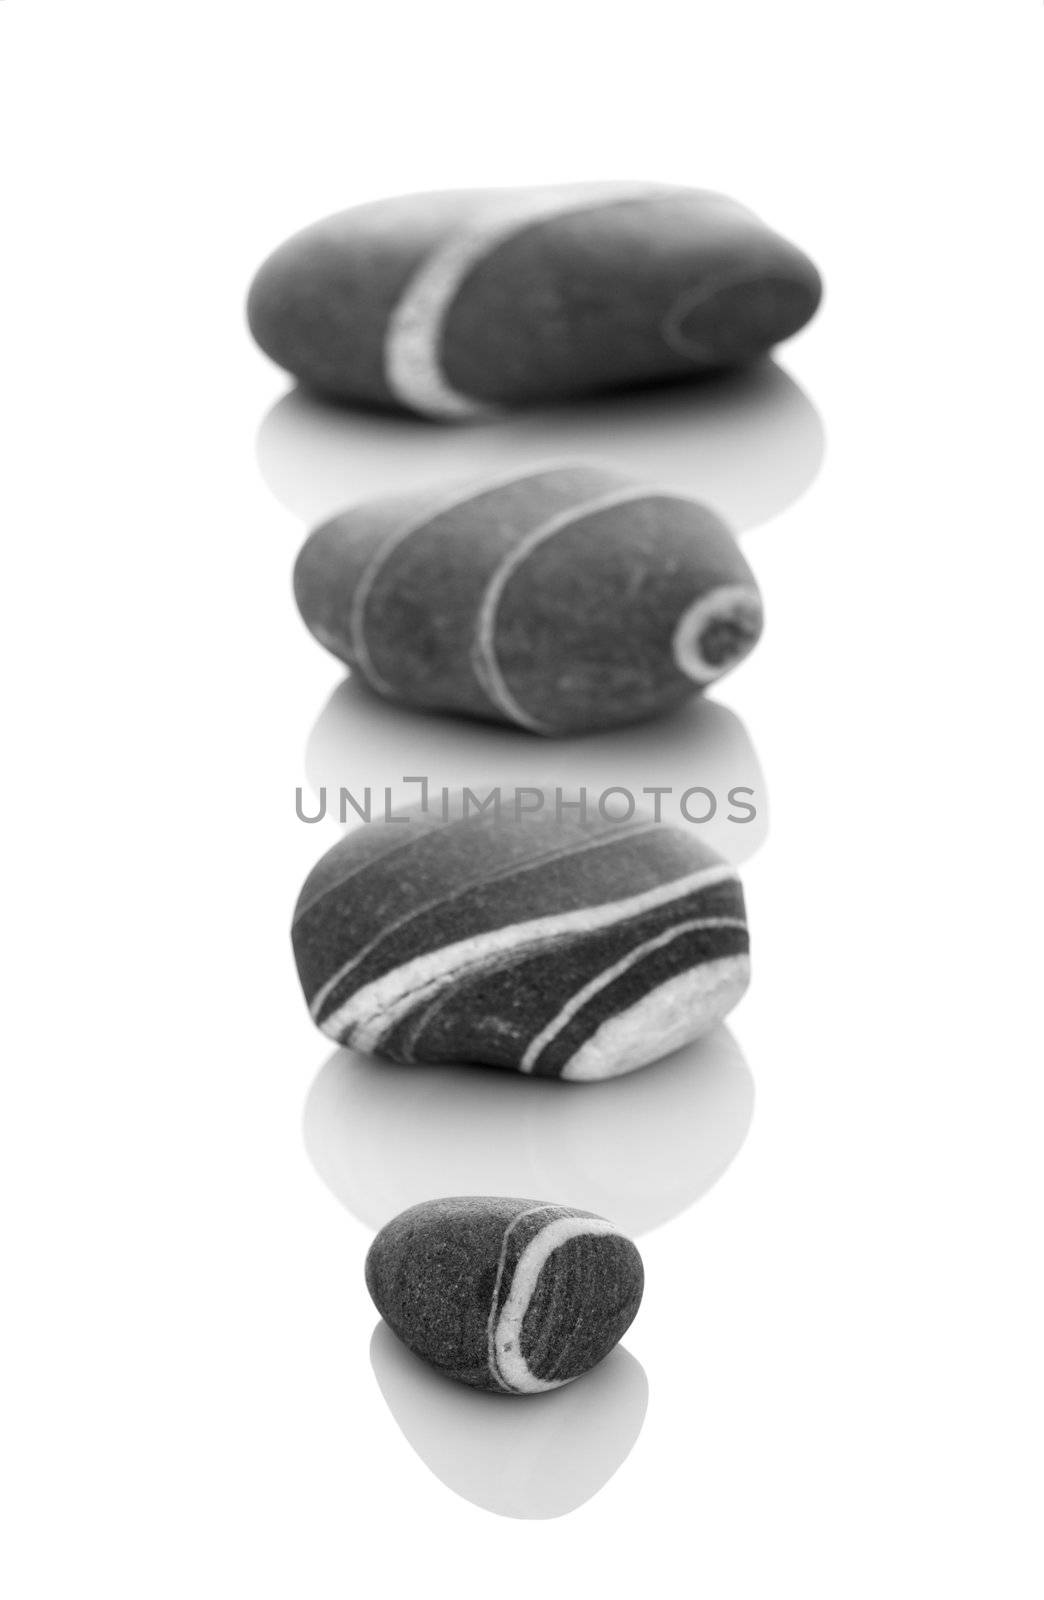 Four stones with diferent sizes in DOF, isolated on a white background